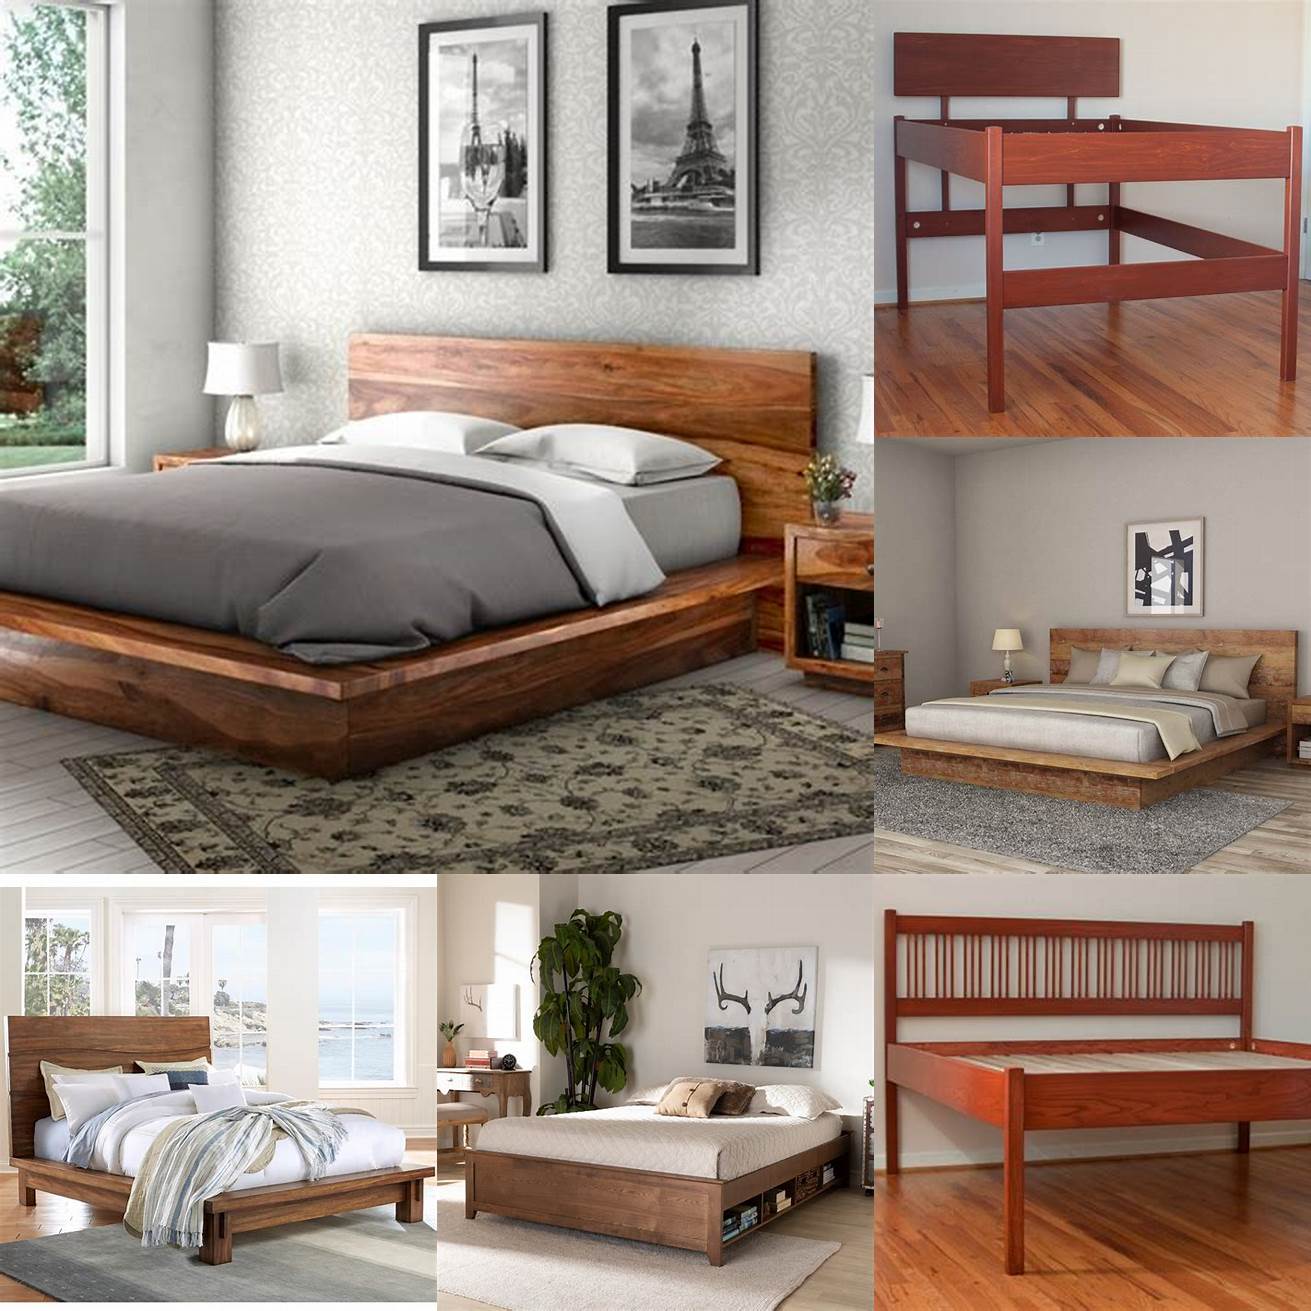 Image of a high platform bed with a wood frame